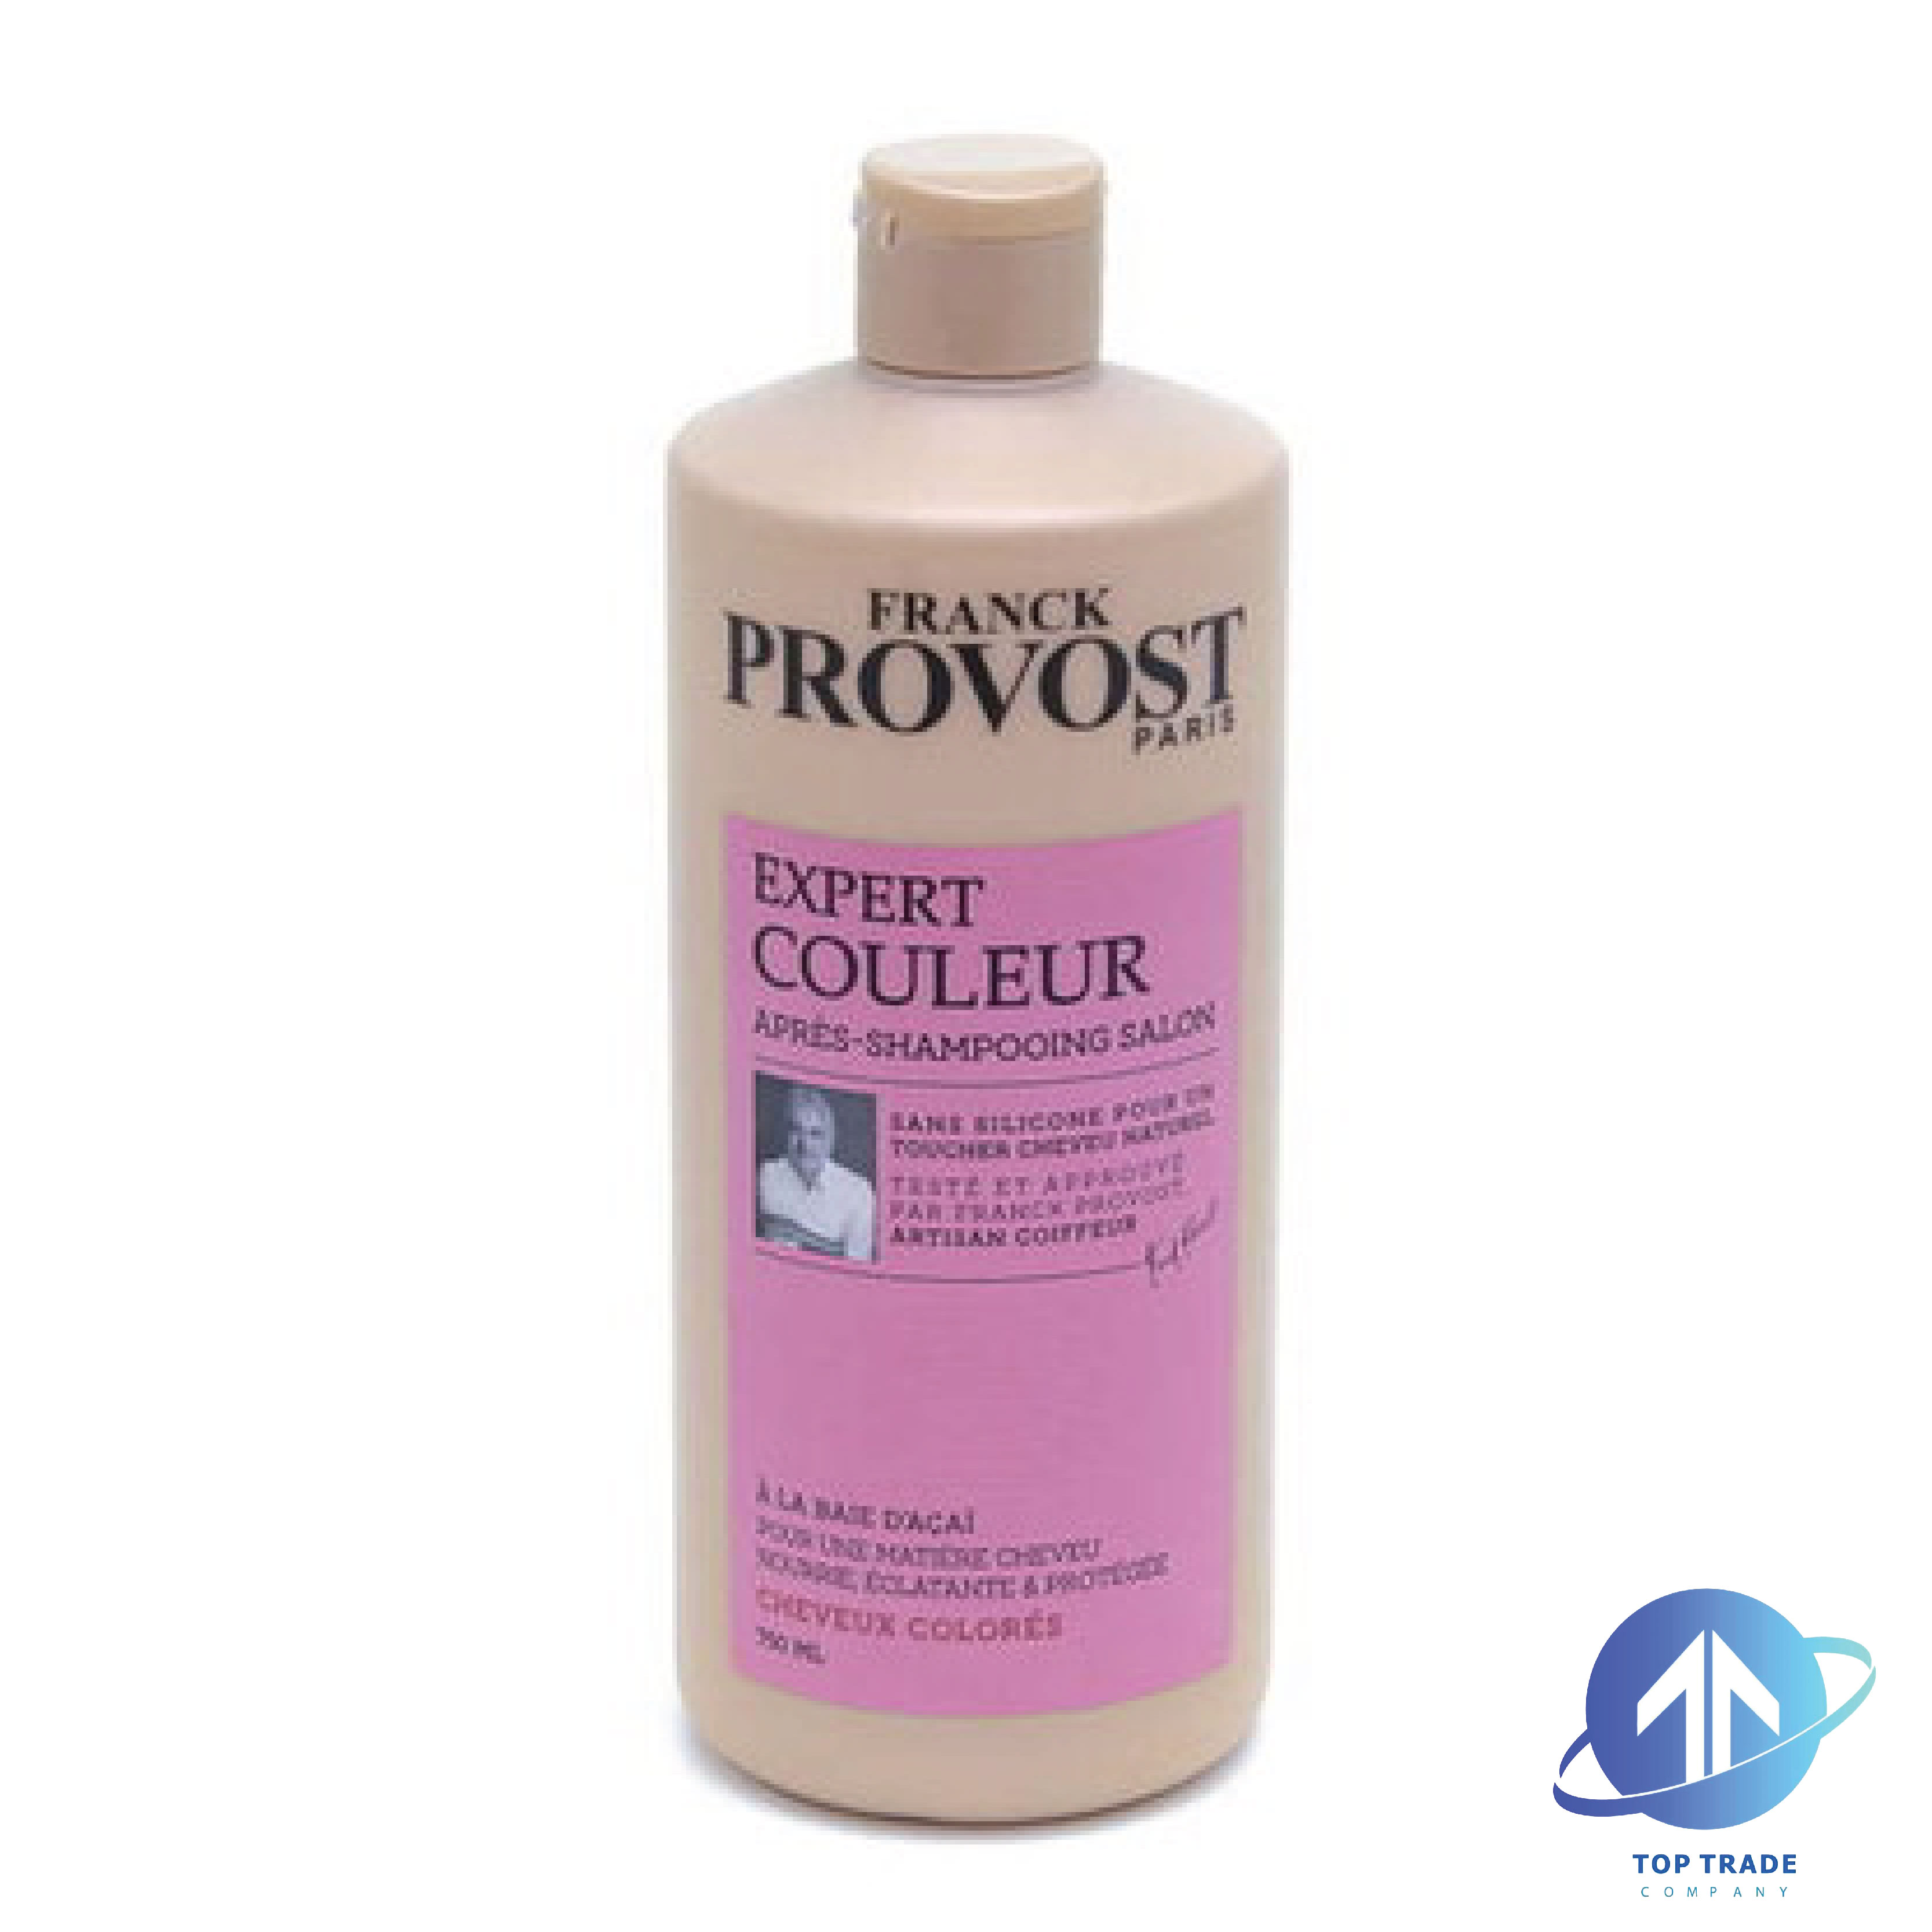 Franck Provost Expert couleur conditioner colored hair 750ml 